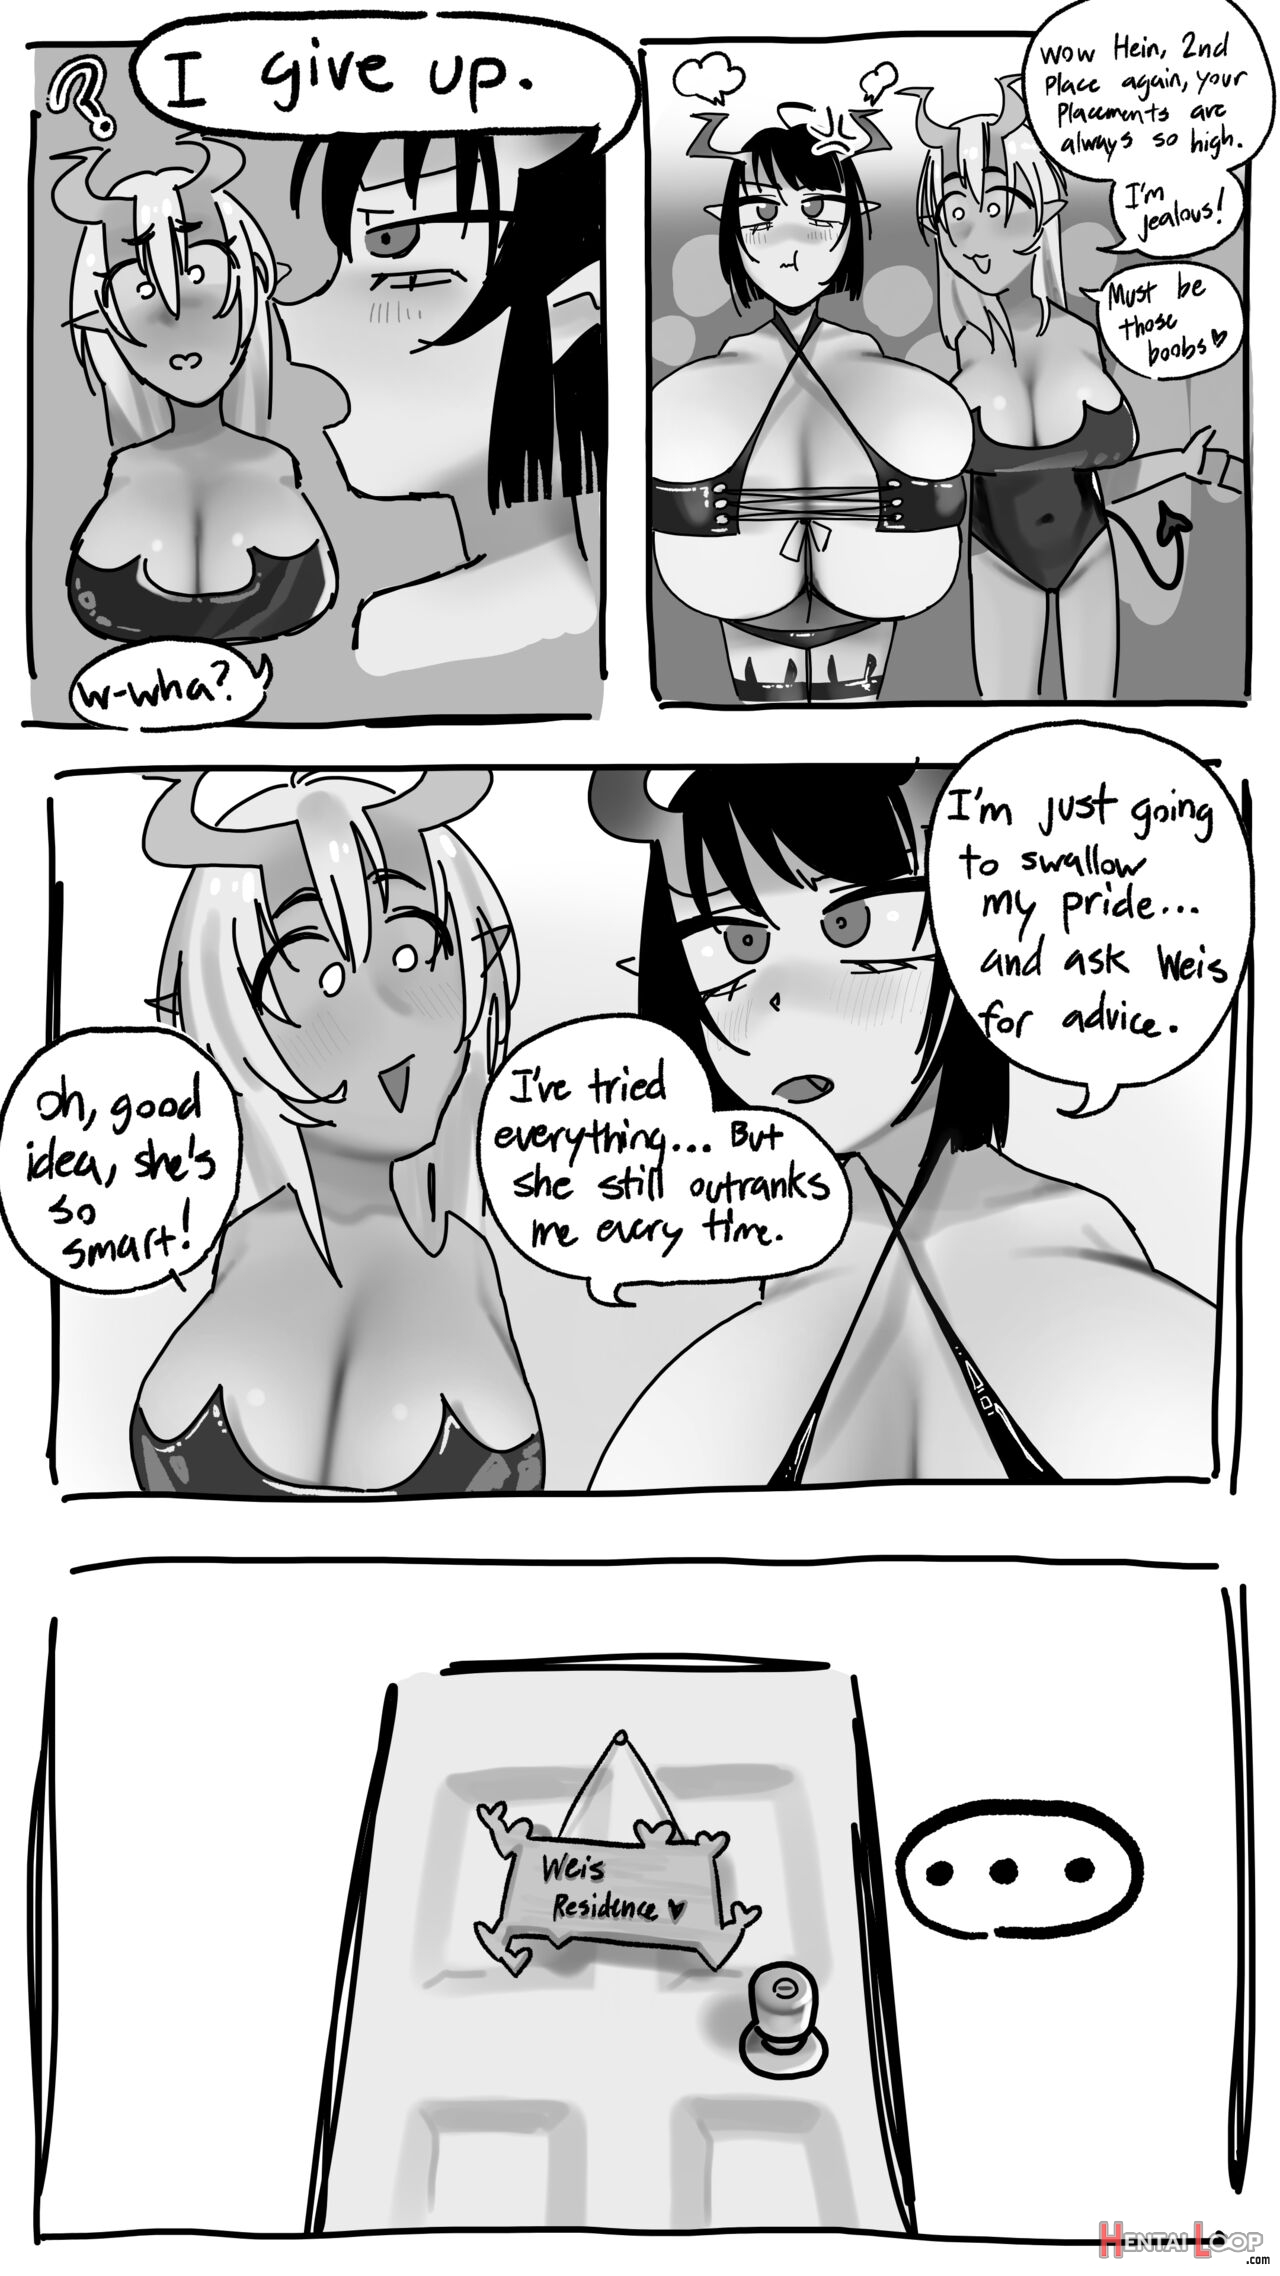 Succubus Story - Decensored page 4